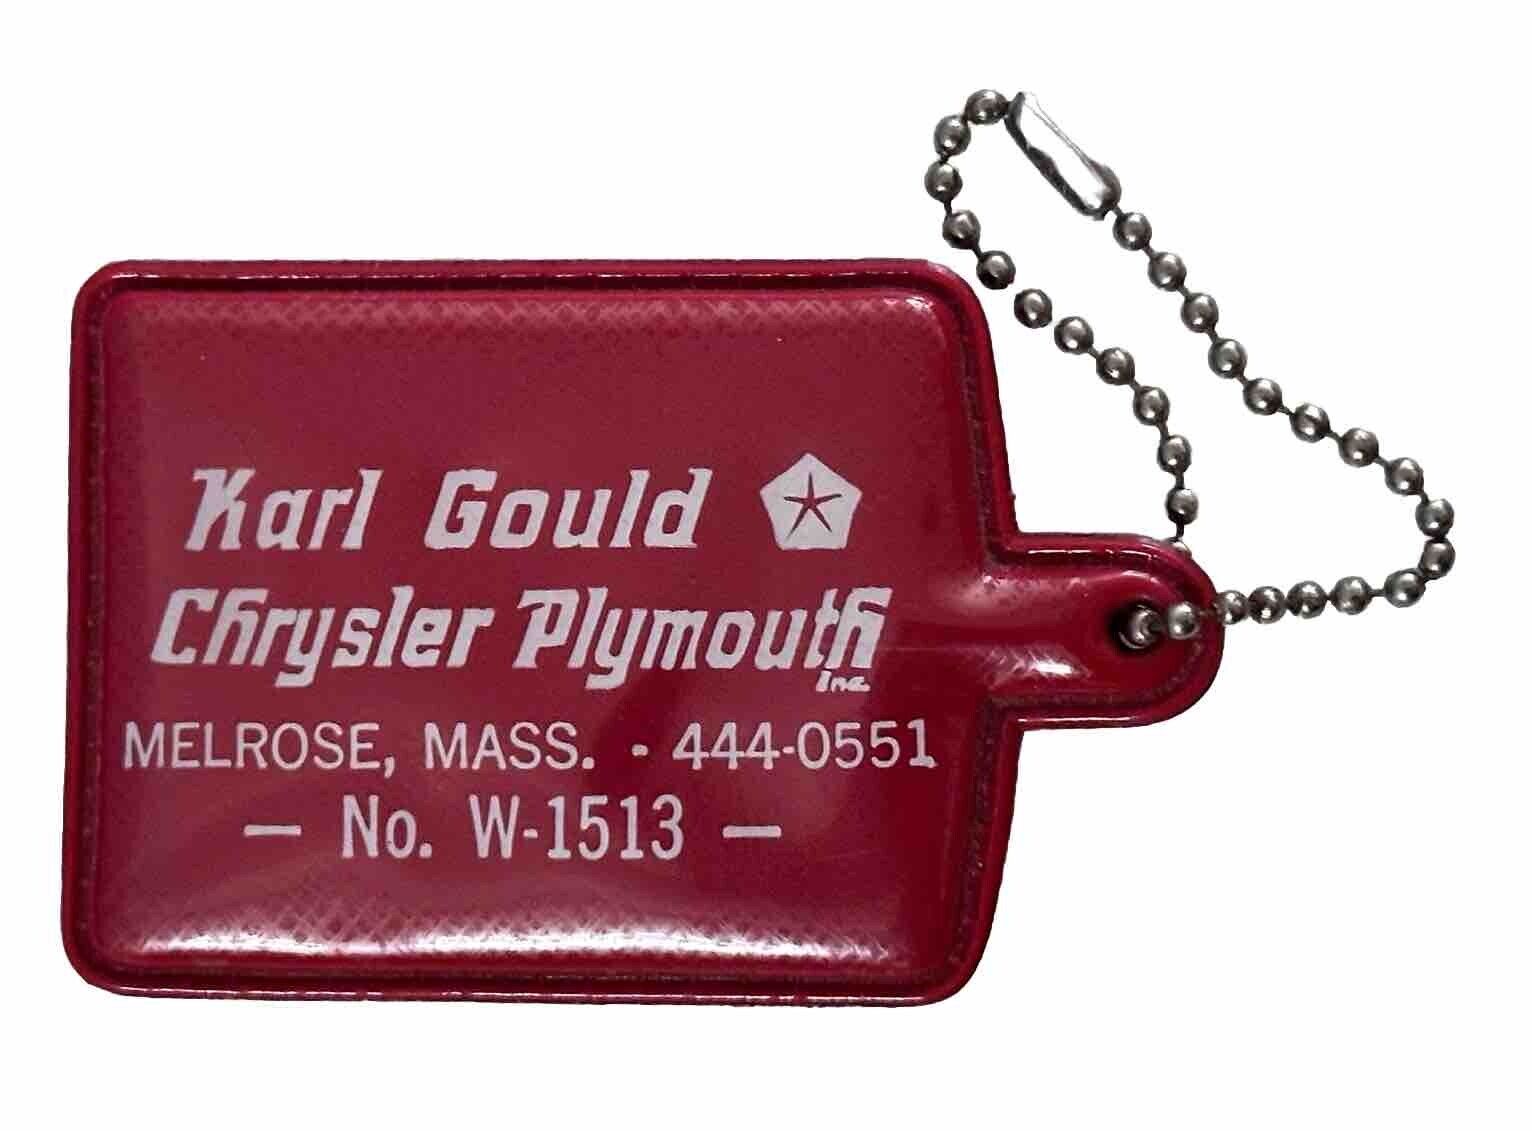 Karl Gould Chrysler Plymouth Melrose, Mass. No. W-1513 Automobile Car Keychain